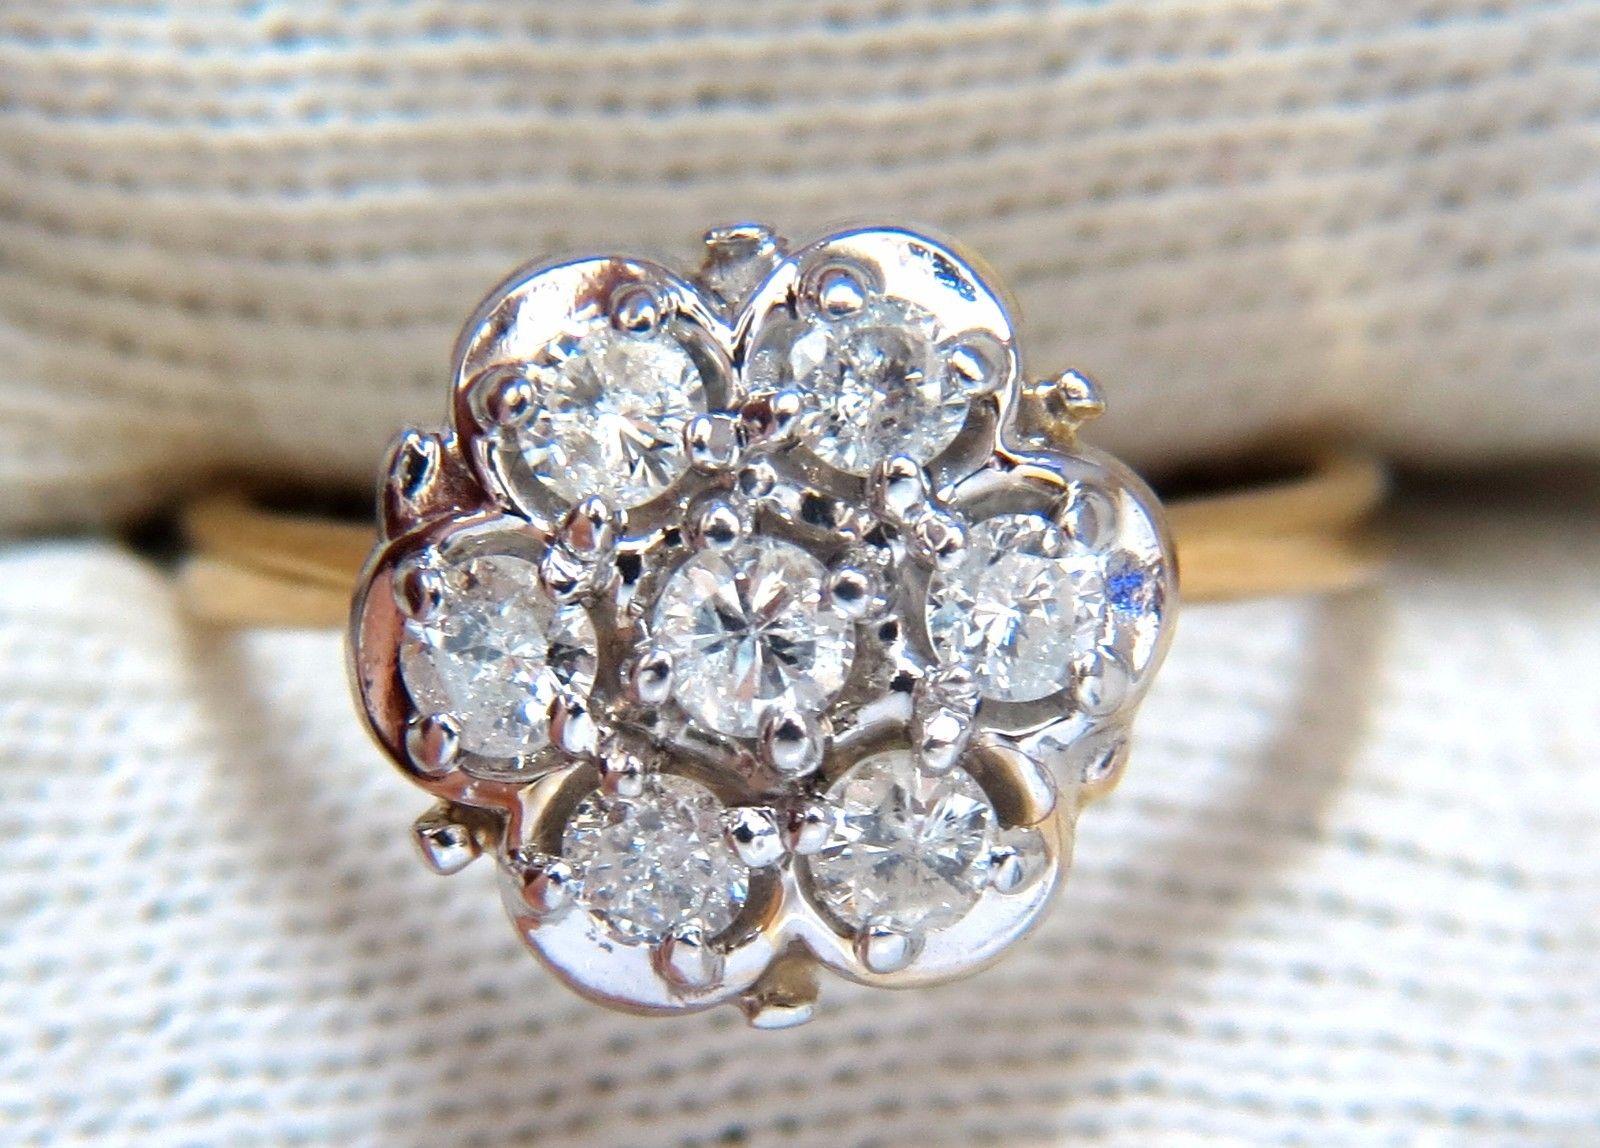 Raised Cluster deco, European Vintage Class


.45ct. Natural round diamonds cluster ring.

Rounds & Full cut Brilliants 

I-color 

I-1, I-2 clarity.

14Kt yellow gold.

3 Grams

Cluster Deck of ring: .42 inch

Depth:  .35 inch

size 5.25

Resizing